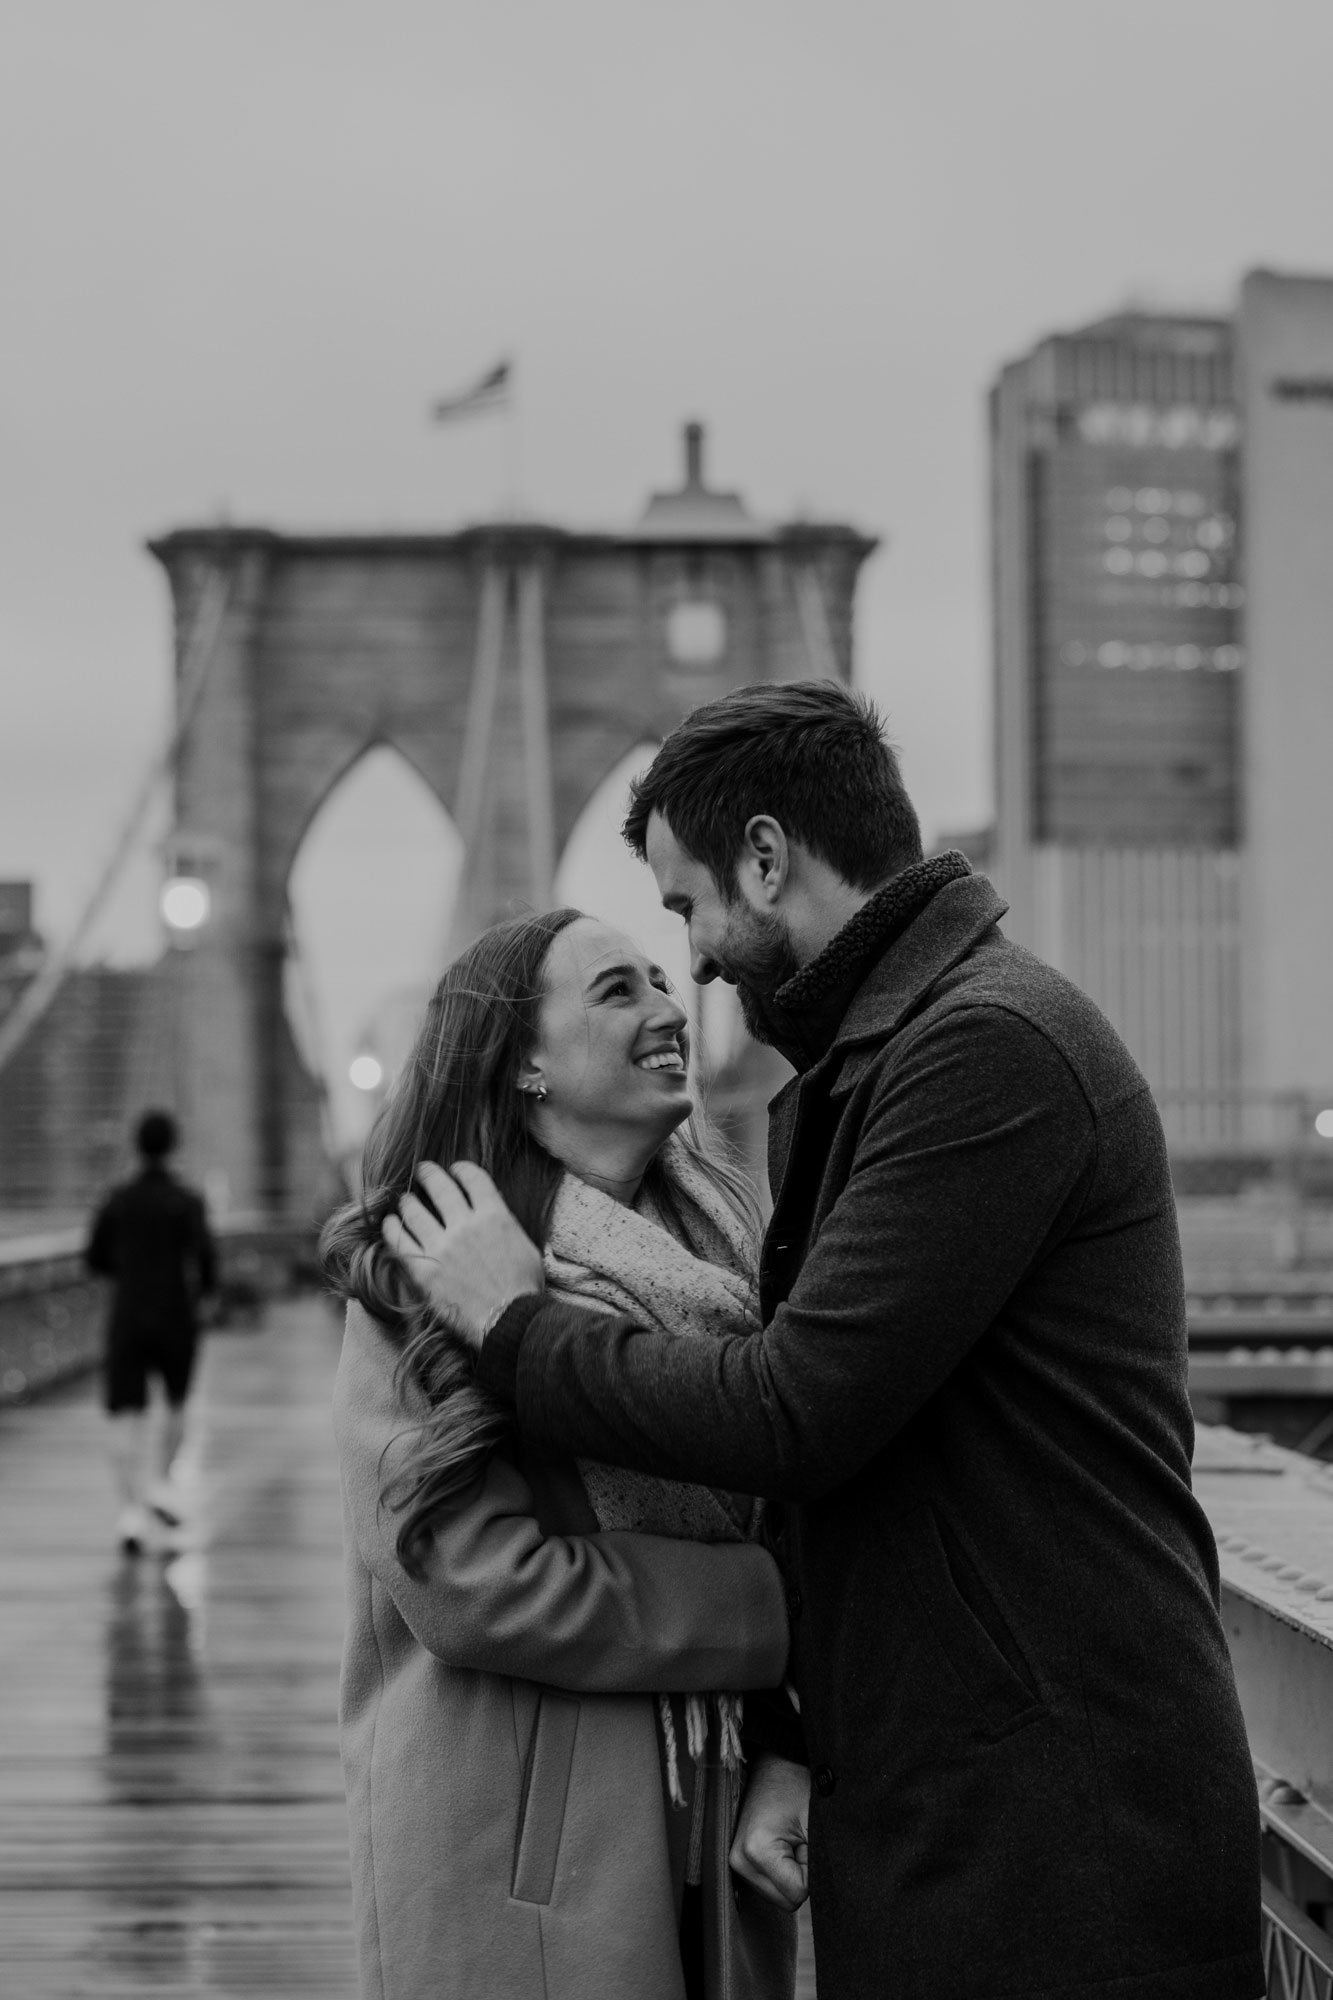 A black and white photo of an engaged couple embracing on the Brooklyn Bridge